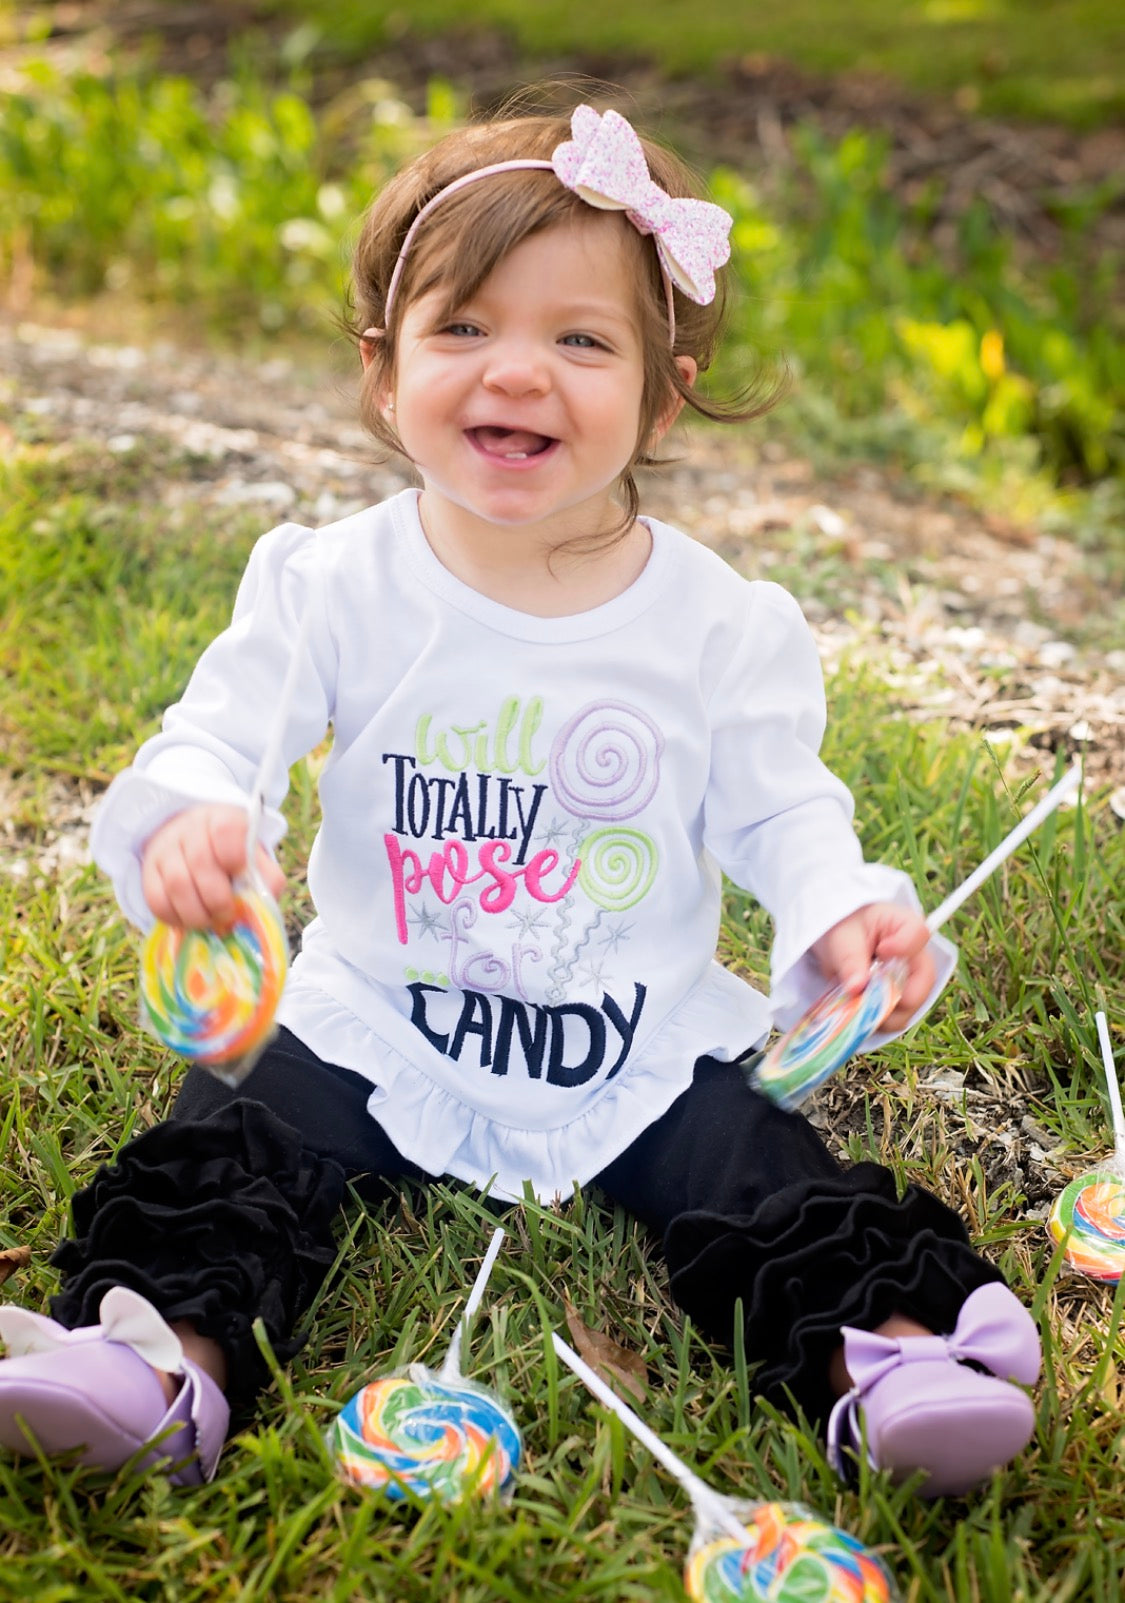 Will totally pose for Candy! - Halloween Tee